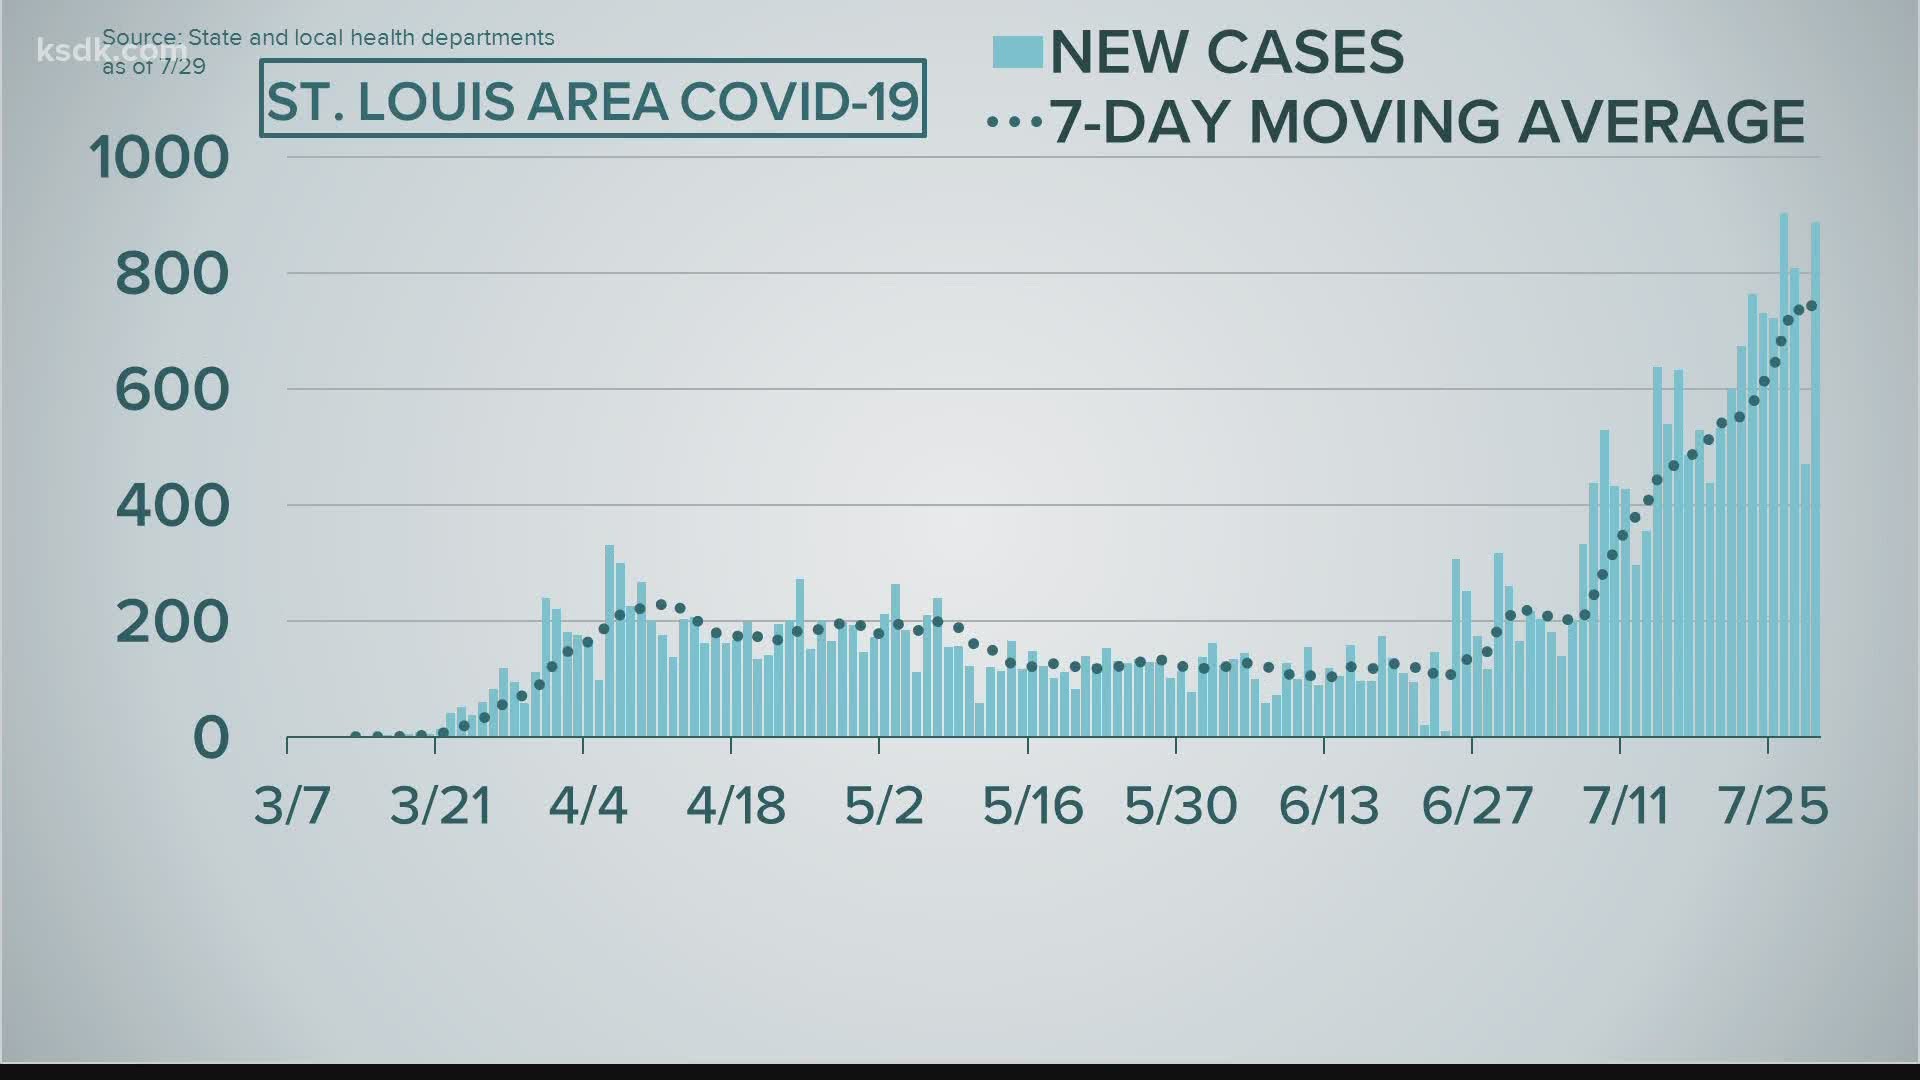 Both Missouri and the St. Louis area continue to see large increases in the number of COVID-19 cases